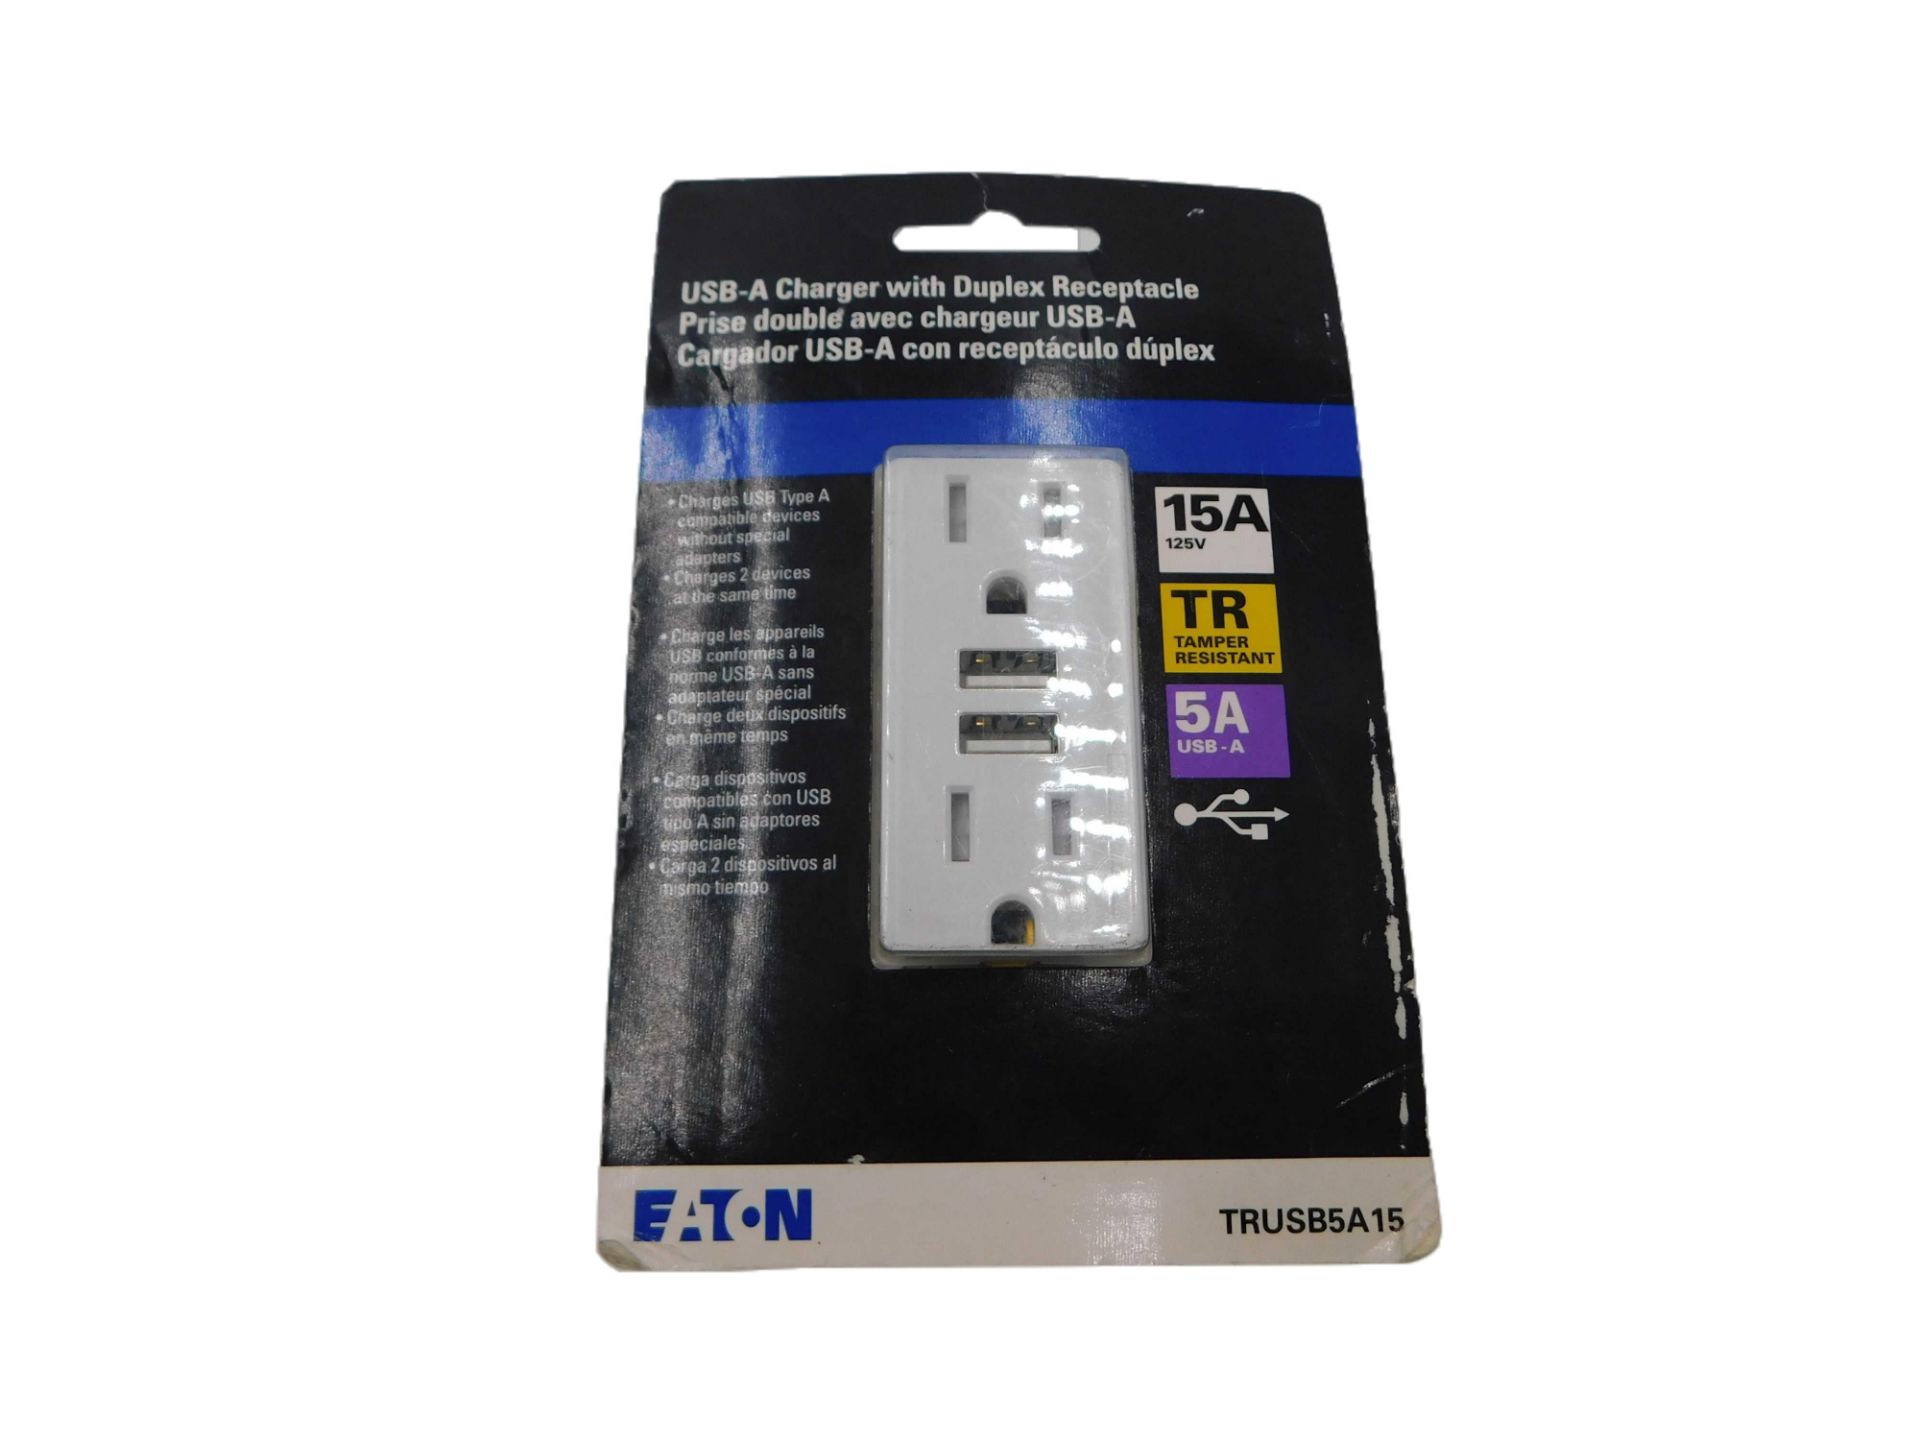 47x Eaton TRUSB5A15W-KB-LW Outlets Combination USB Charger/Duplex Receptacle 15A 125V White EA Tampe